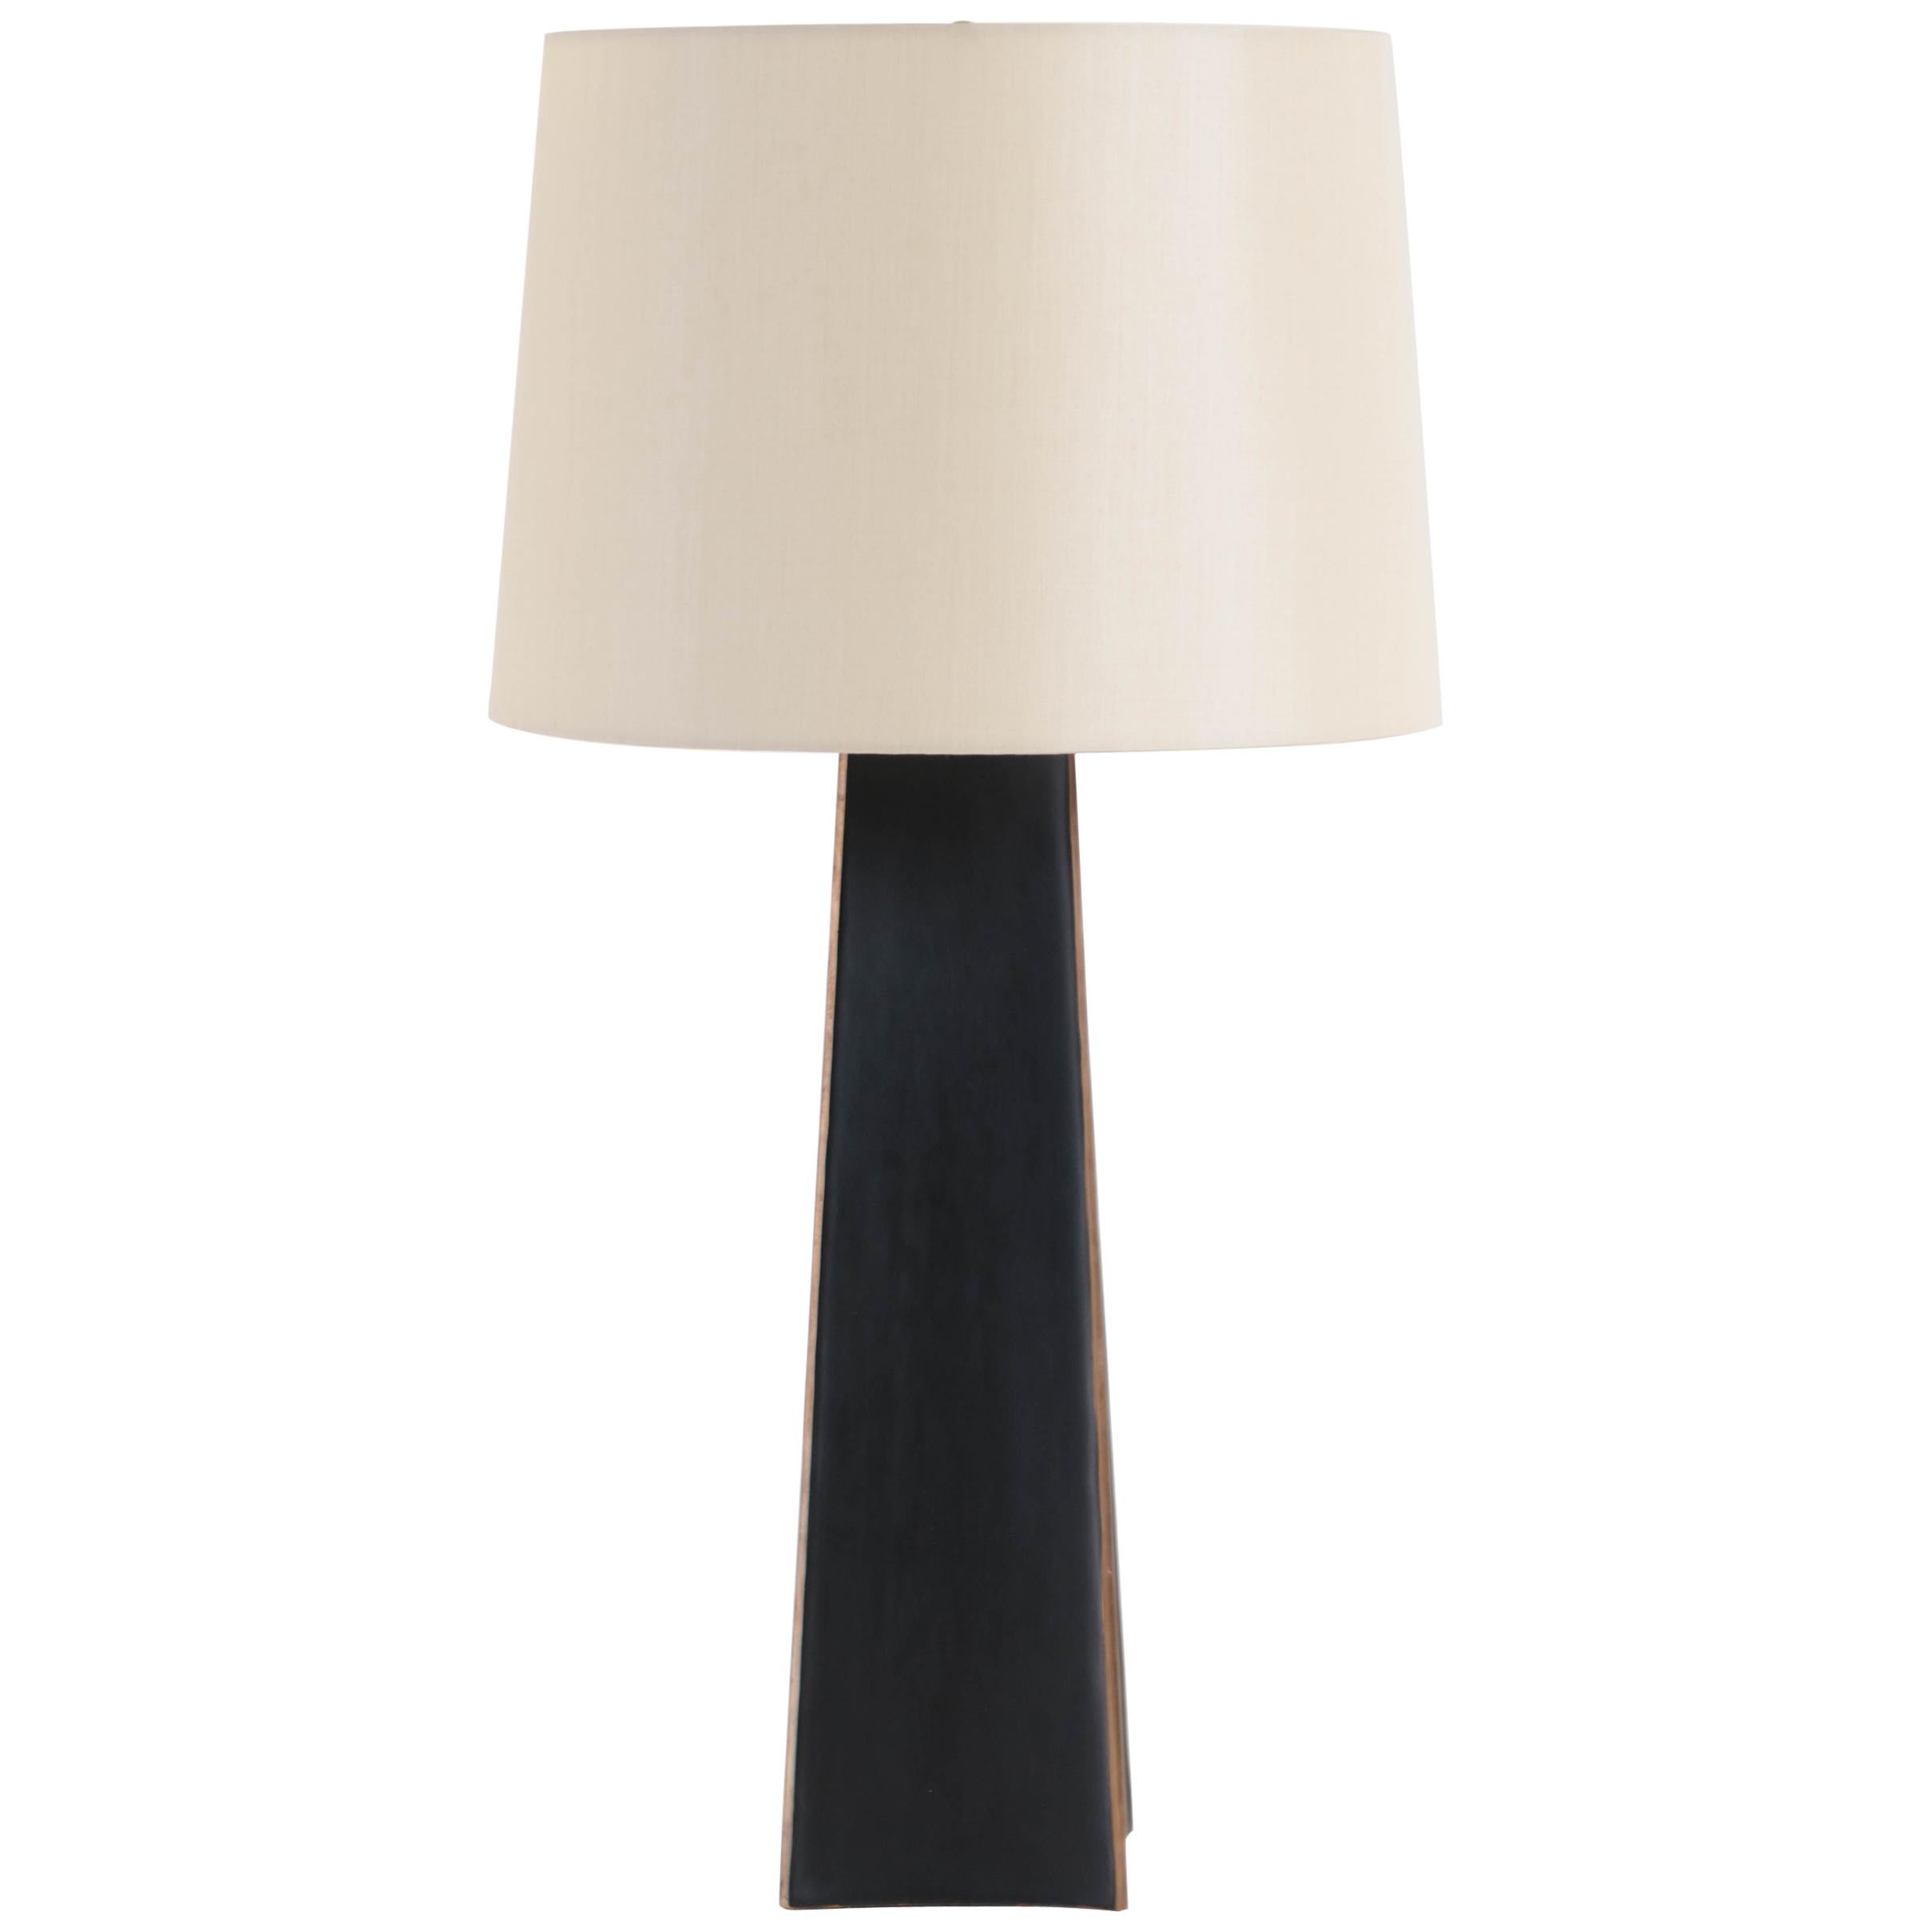 Si Wa Table Lamp, Black Lacquer by Robert Kuo, Hand Repousse, Limited Edition For Sale